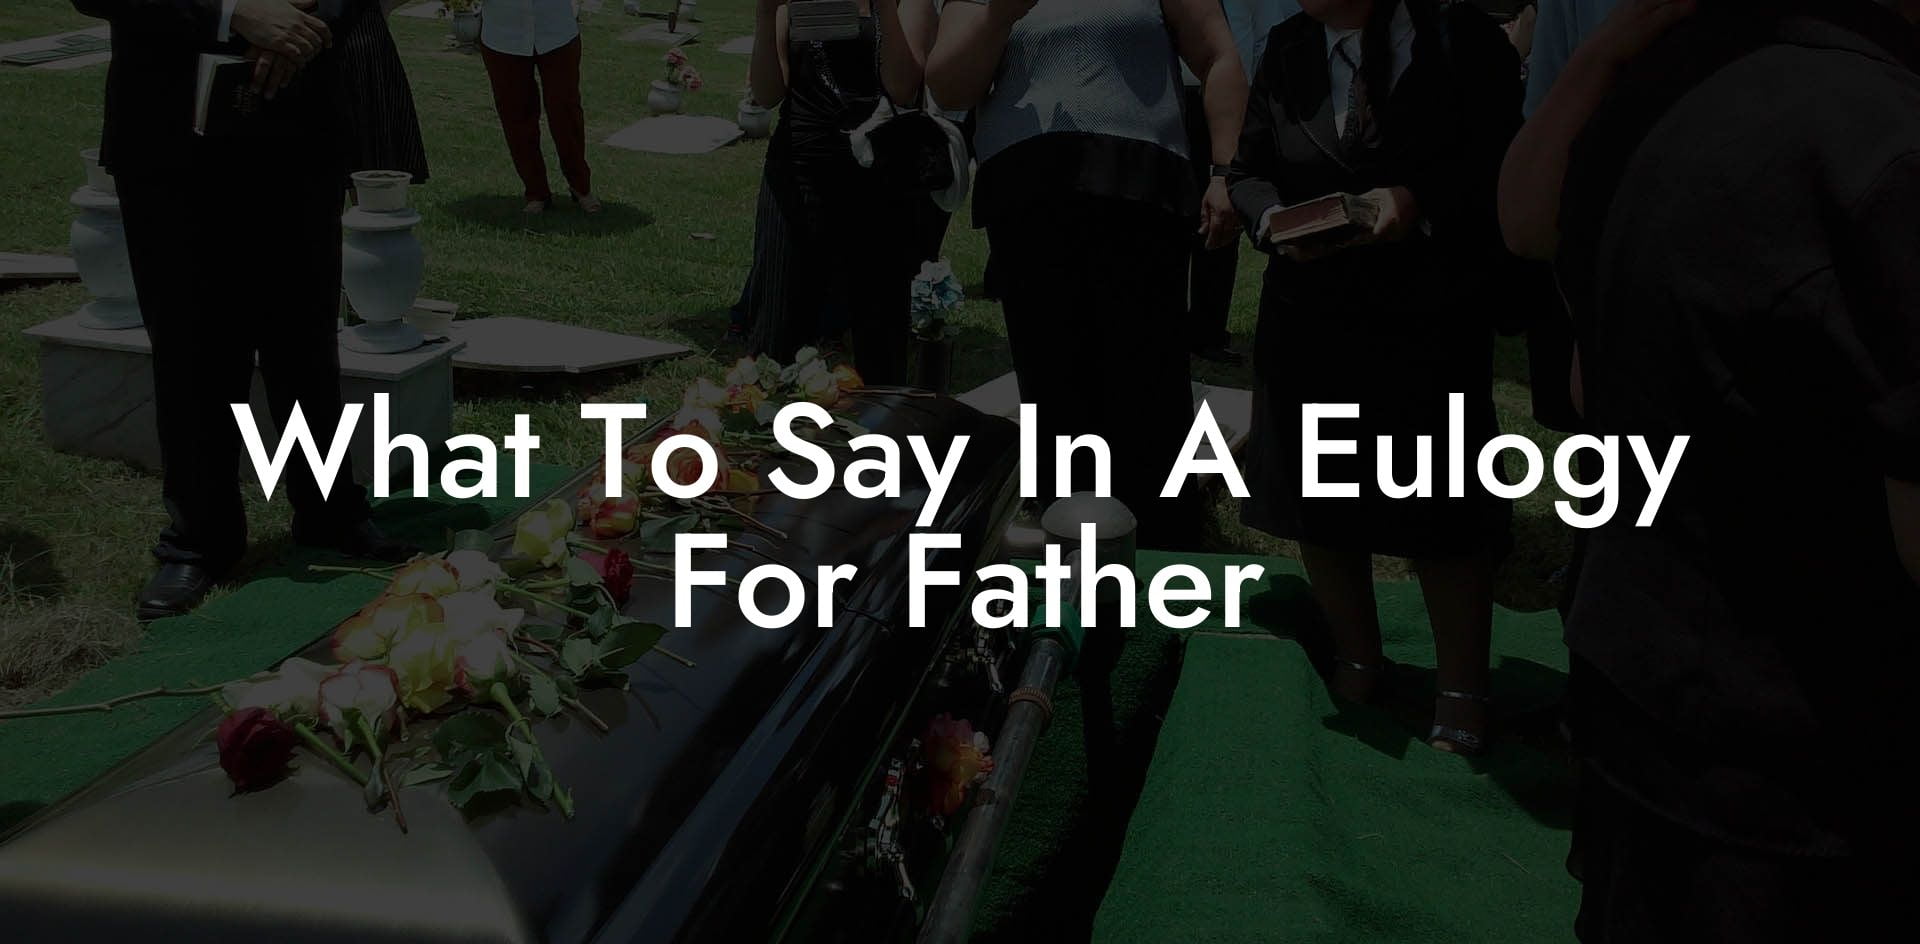 What To Say In A Eulogy For Father